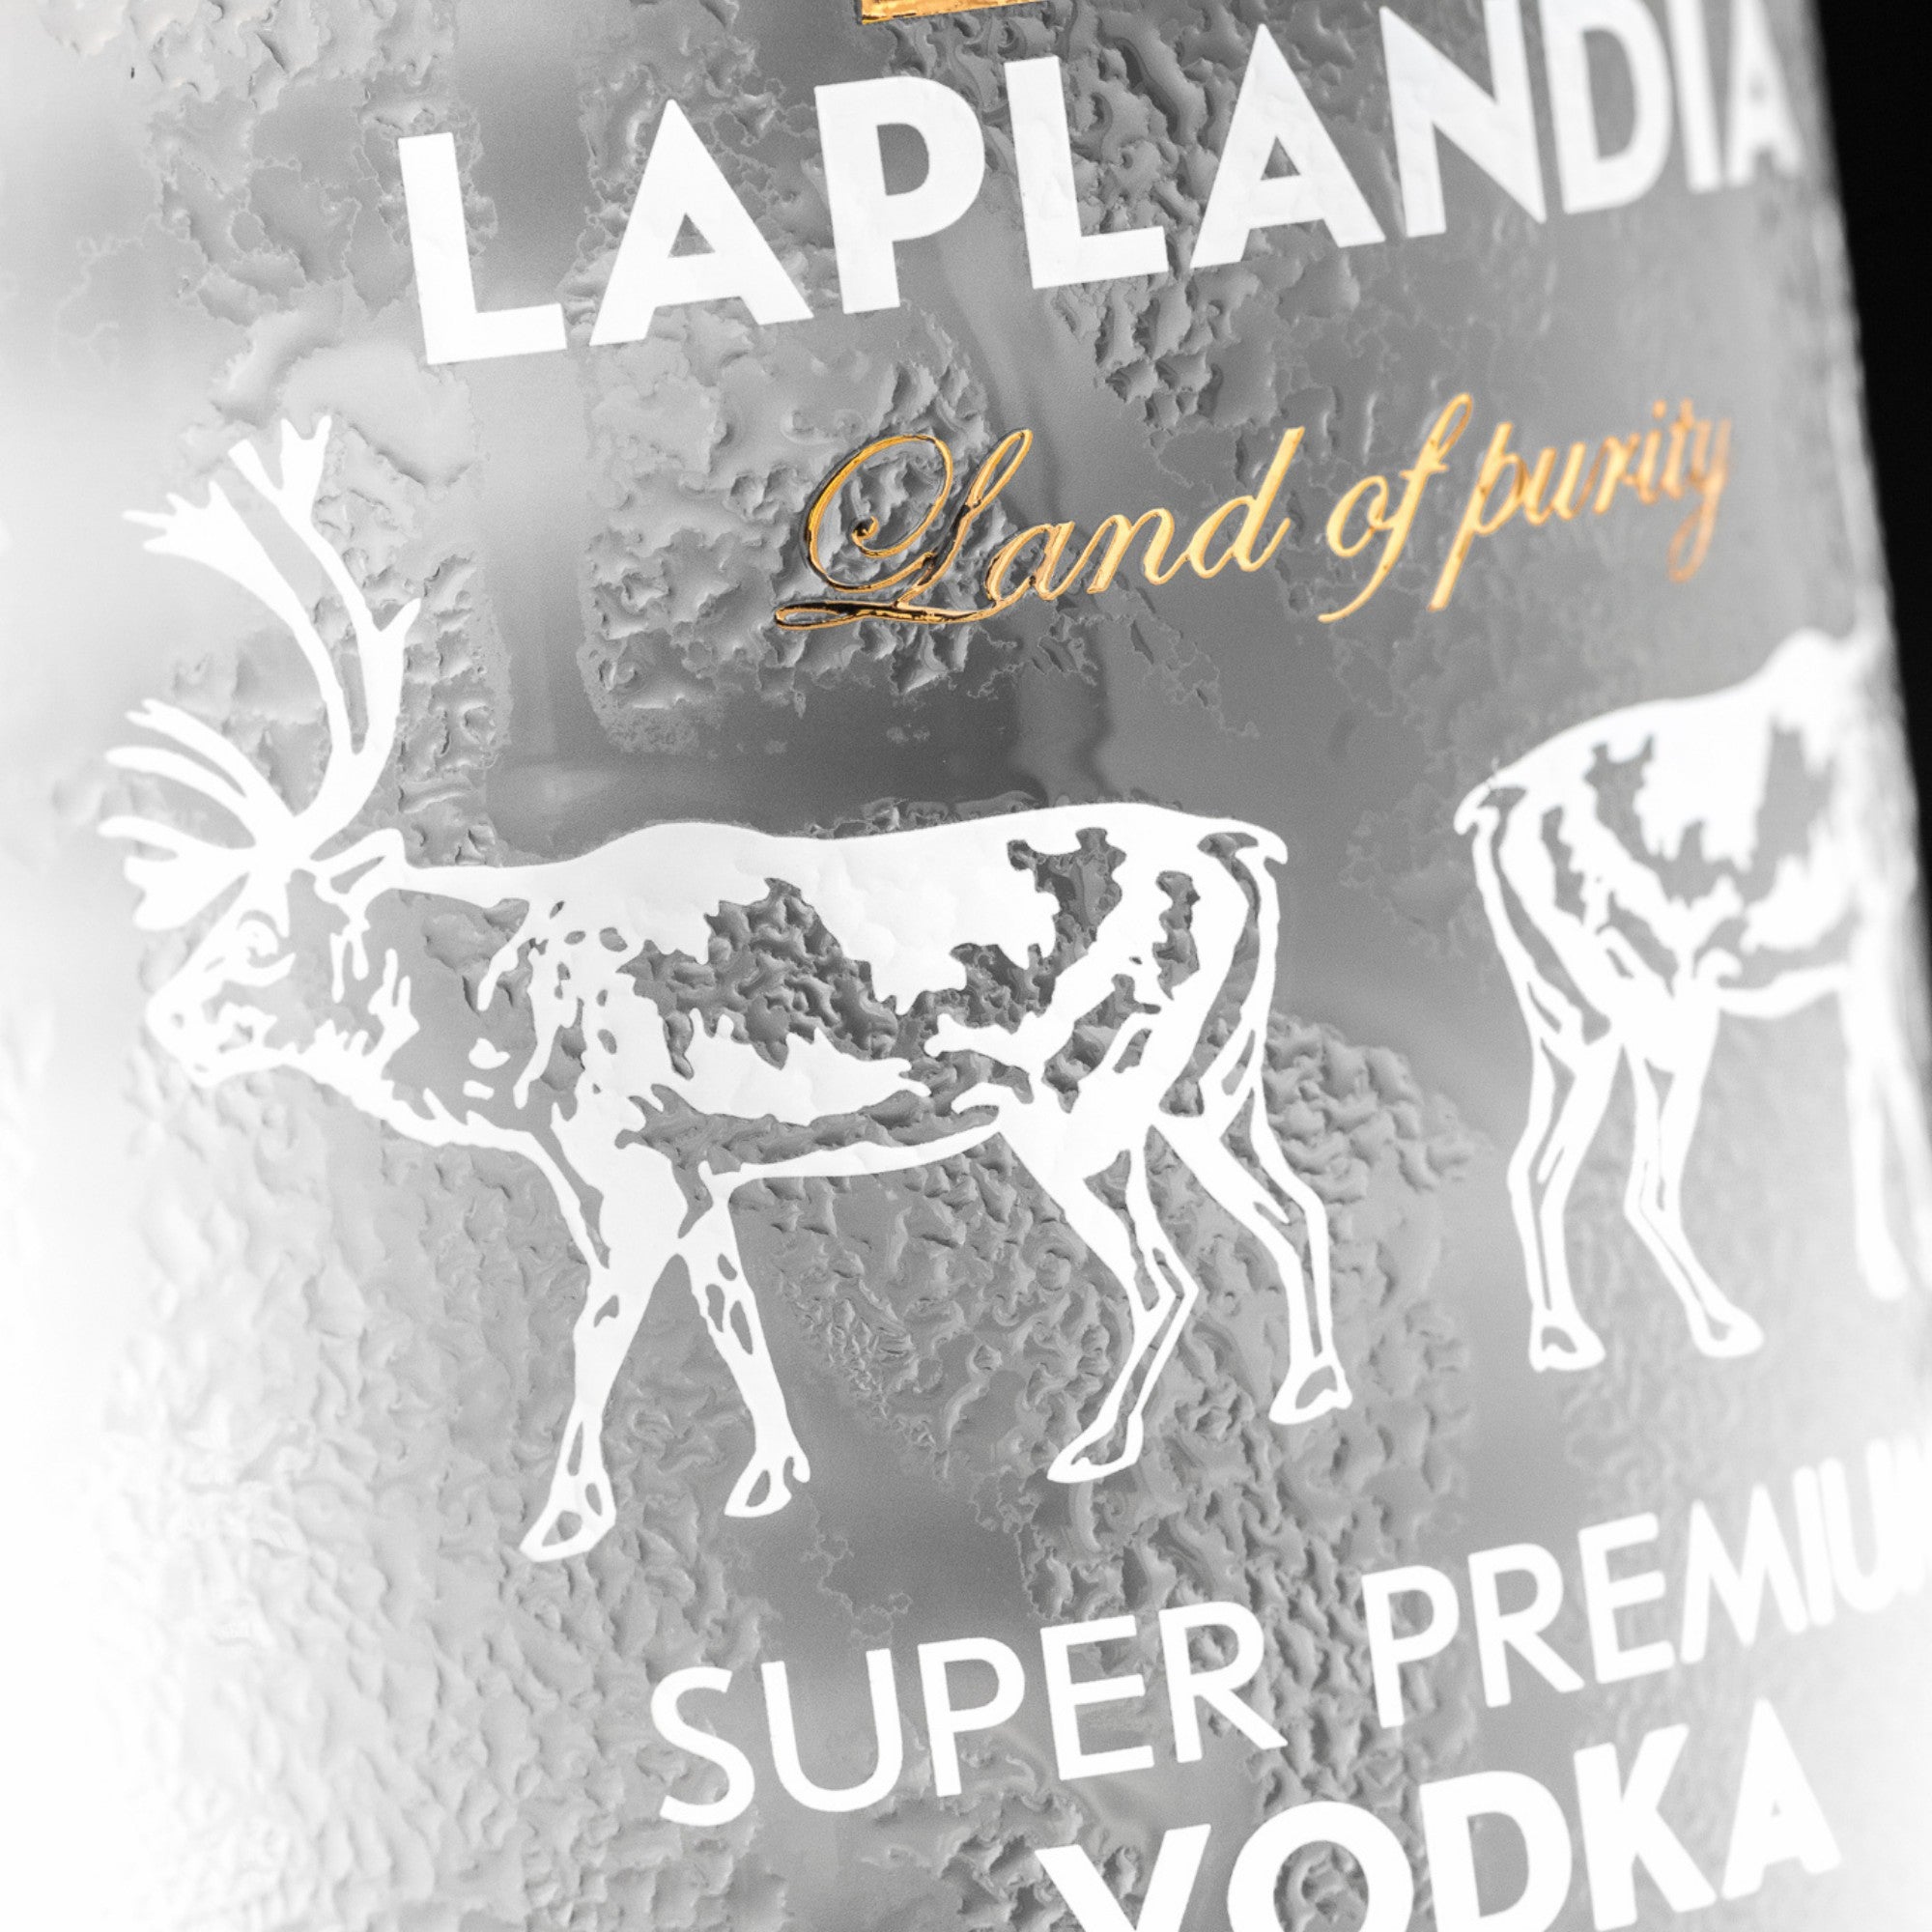 Laplandia Super Premium Vodka with Moscow Mule Cocktail Kit – Yum Seng -  Wine, Spirits and Craft Beer